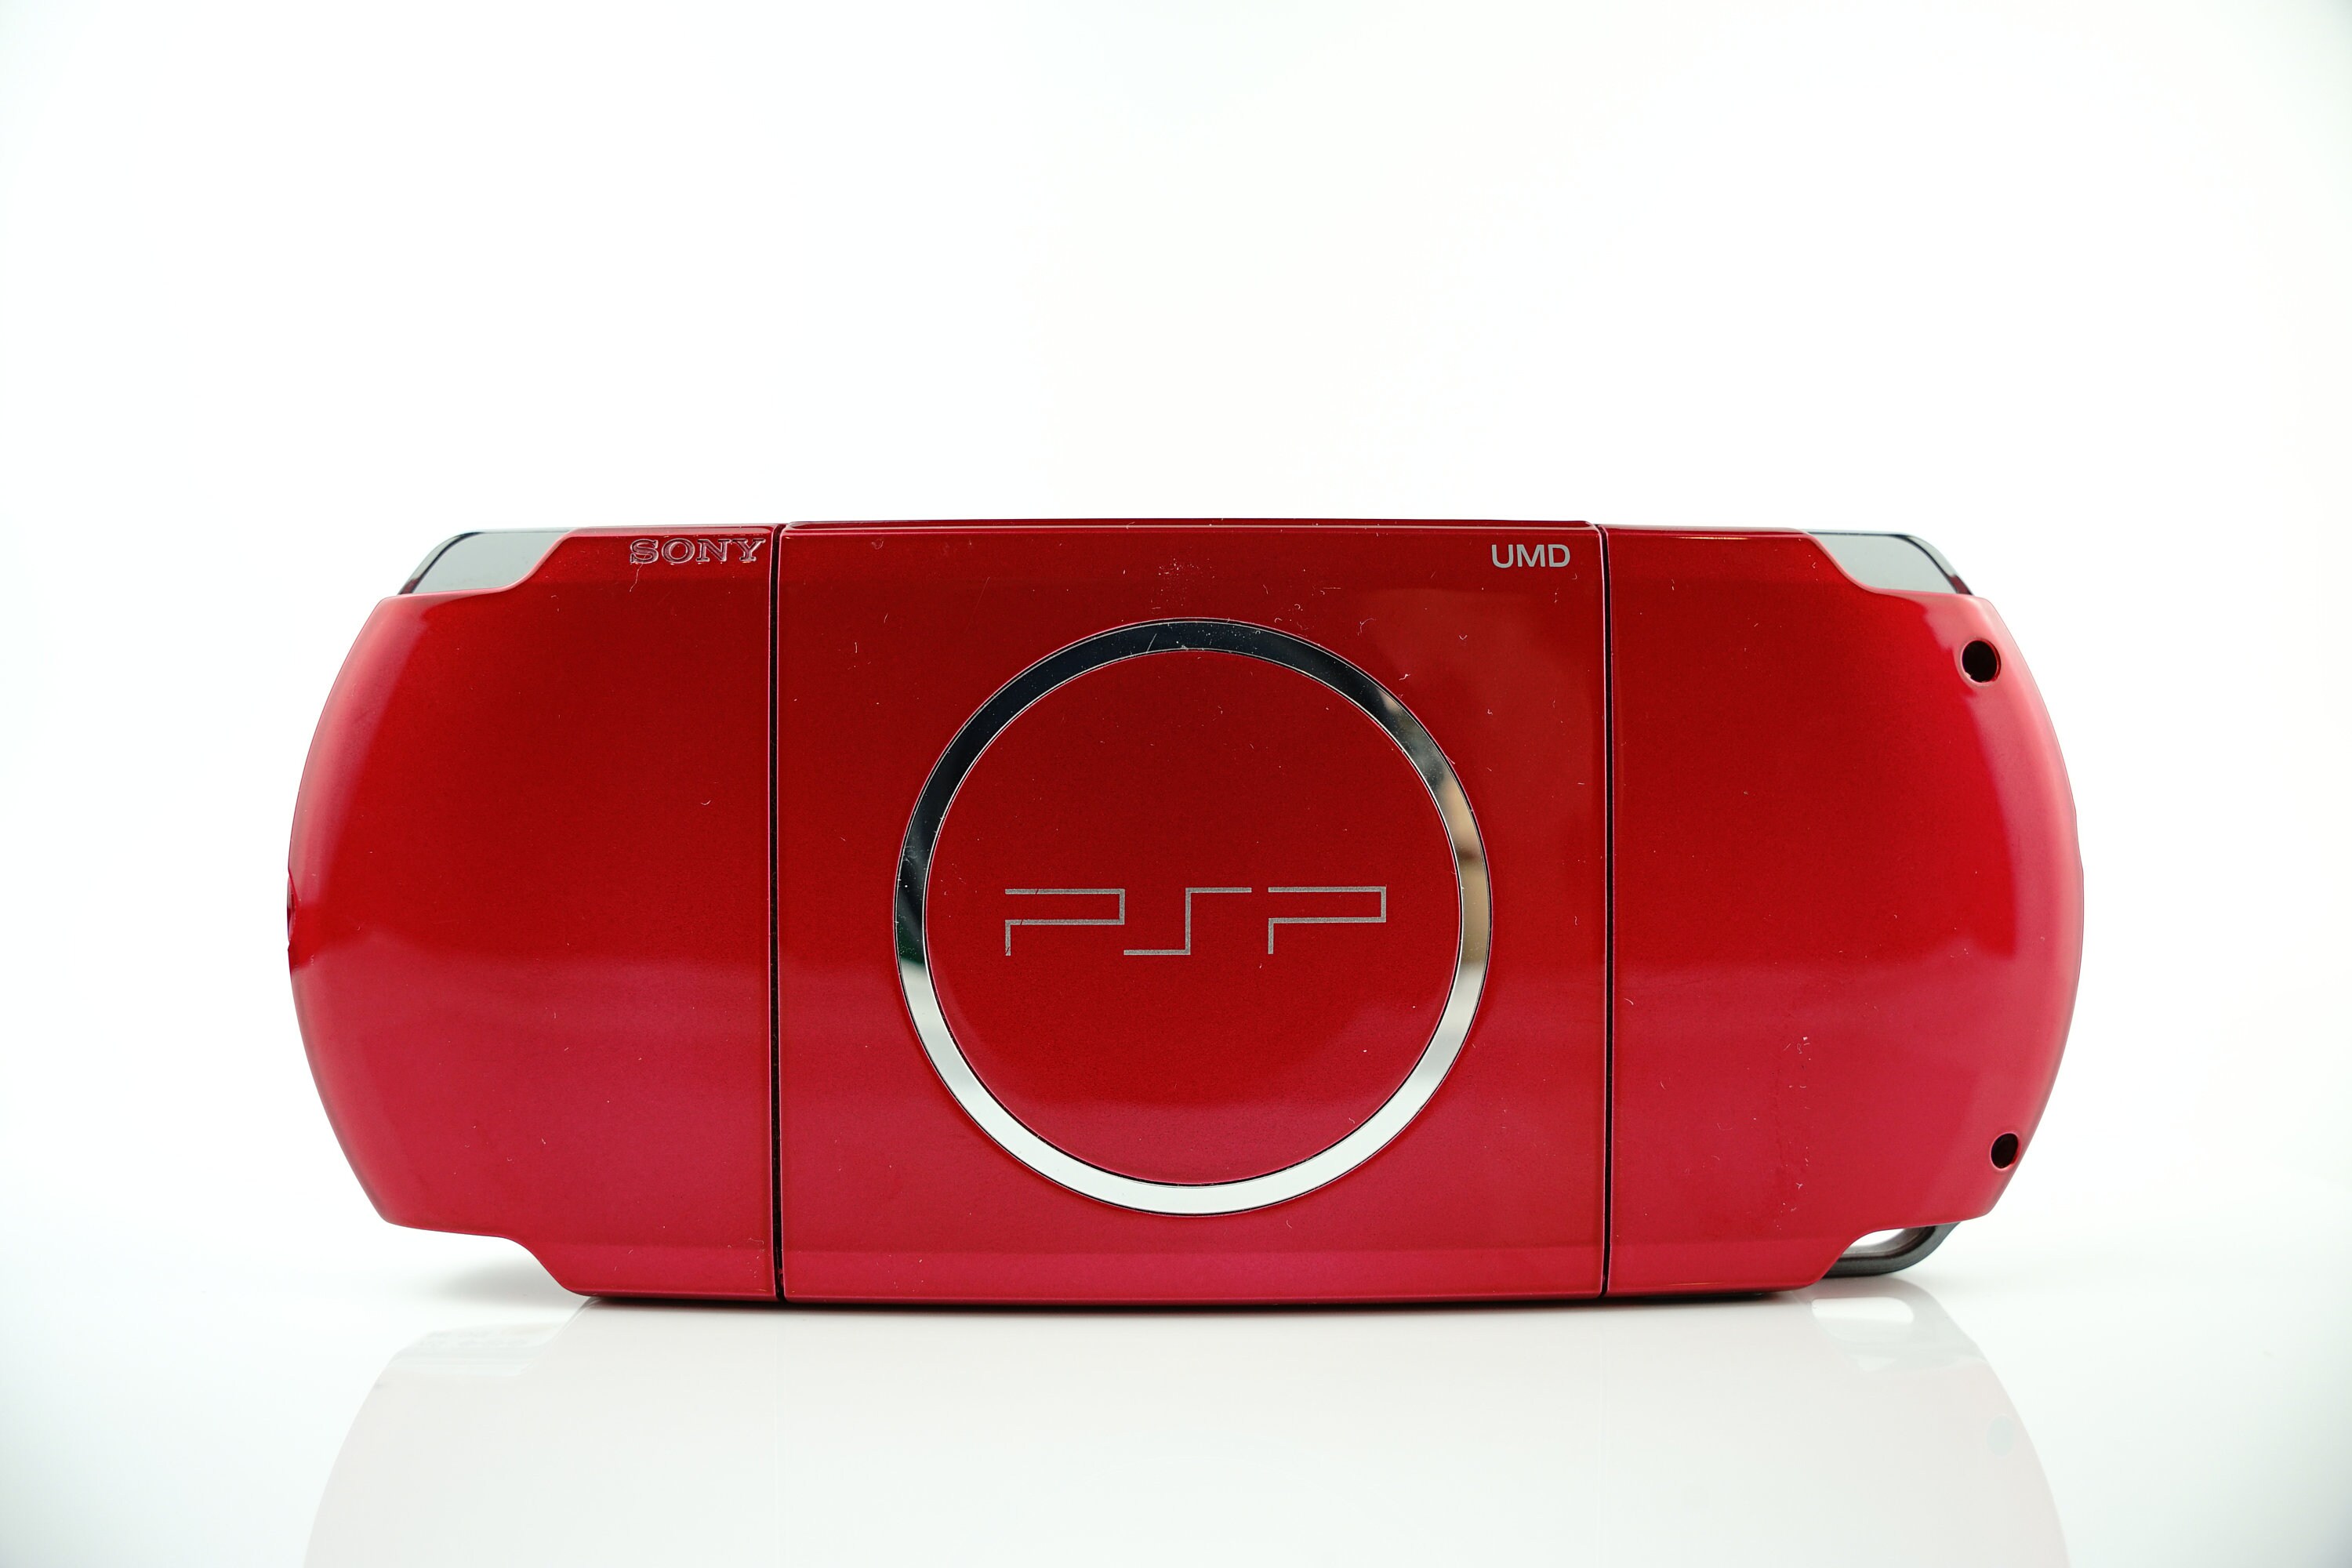 Authentic PlayStation Portable PSP 3000 Console - Radiant Red - 100% OEM